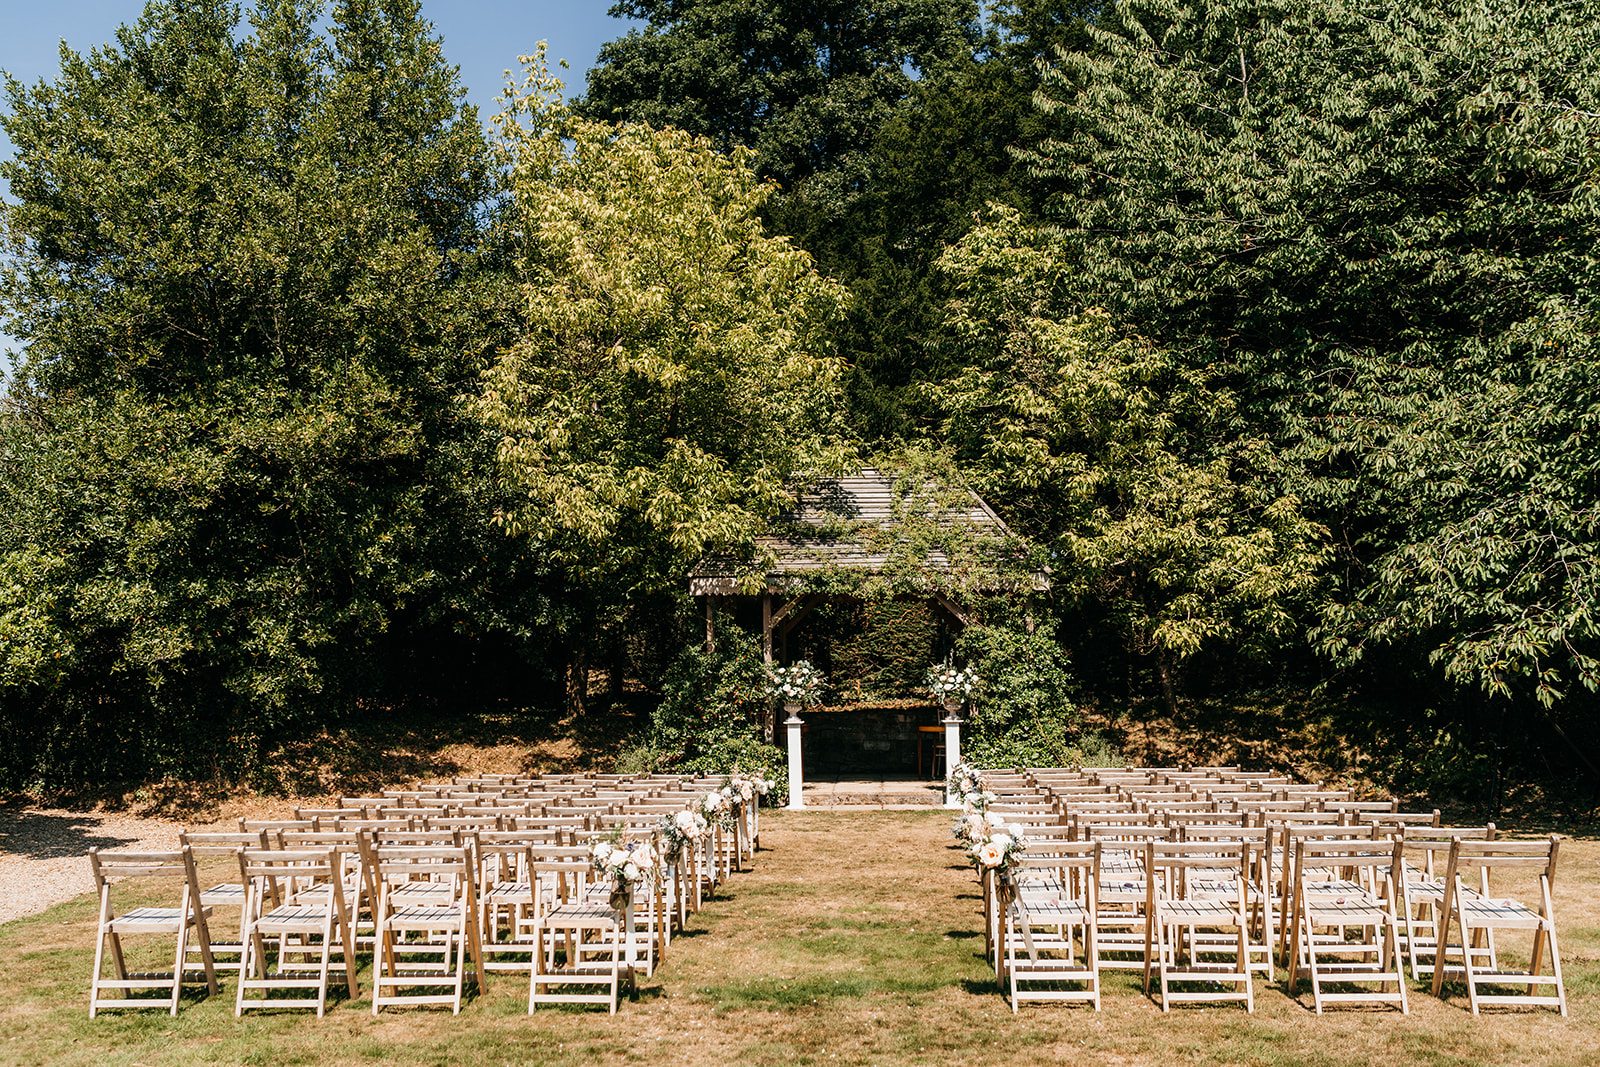 The outdoor ceremony set up on a beautiful summers day